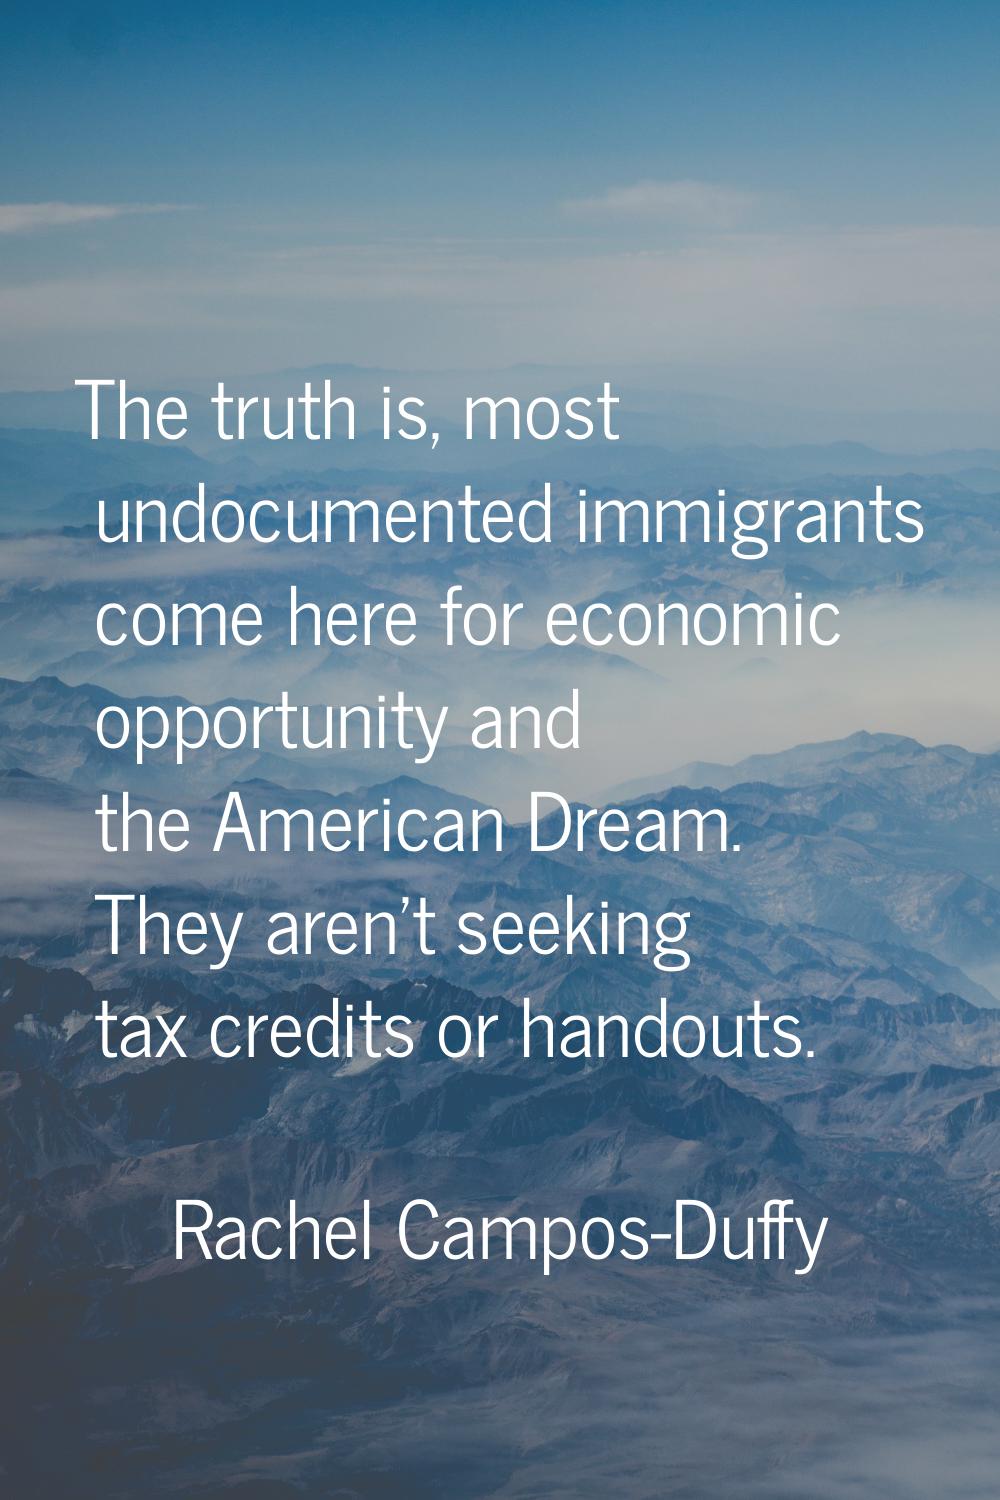 The truth is, most undocumented immigrants come here for economic opportunity and the American Drea